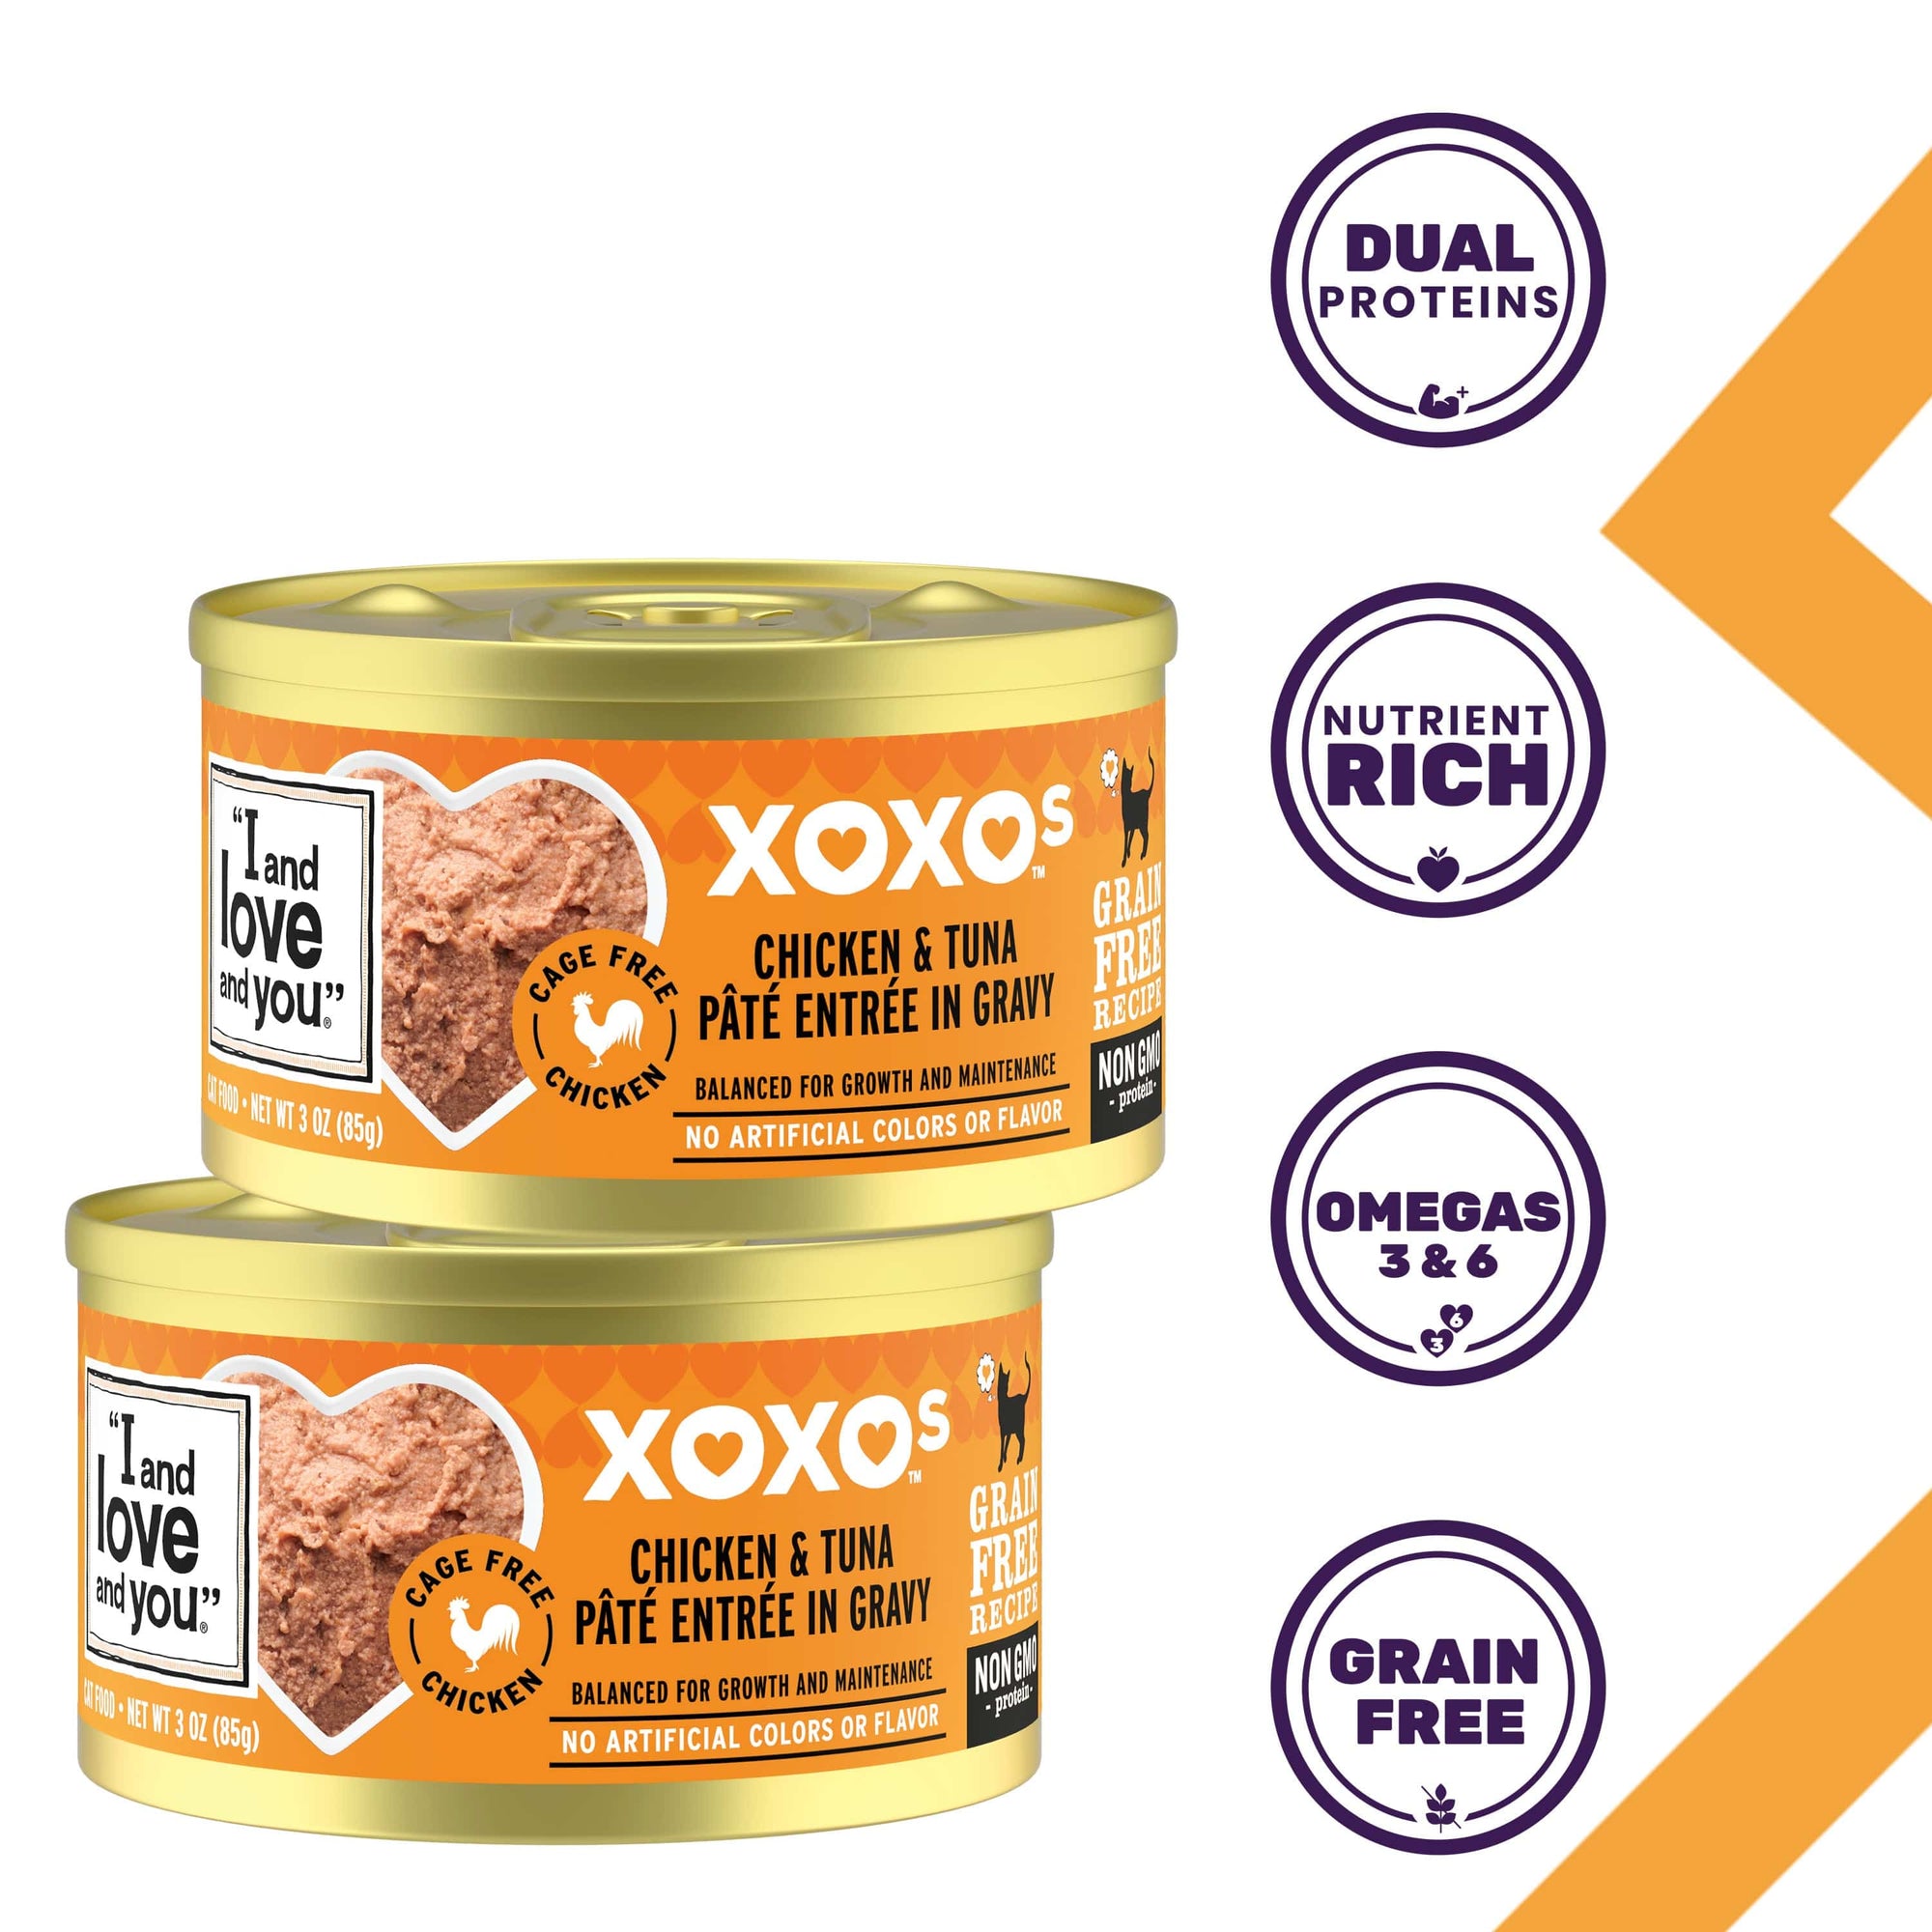 Group of gourmet canned pâté with chicken and tuna, cat-approved flavors, complete & balanced for all life stages.